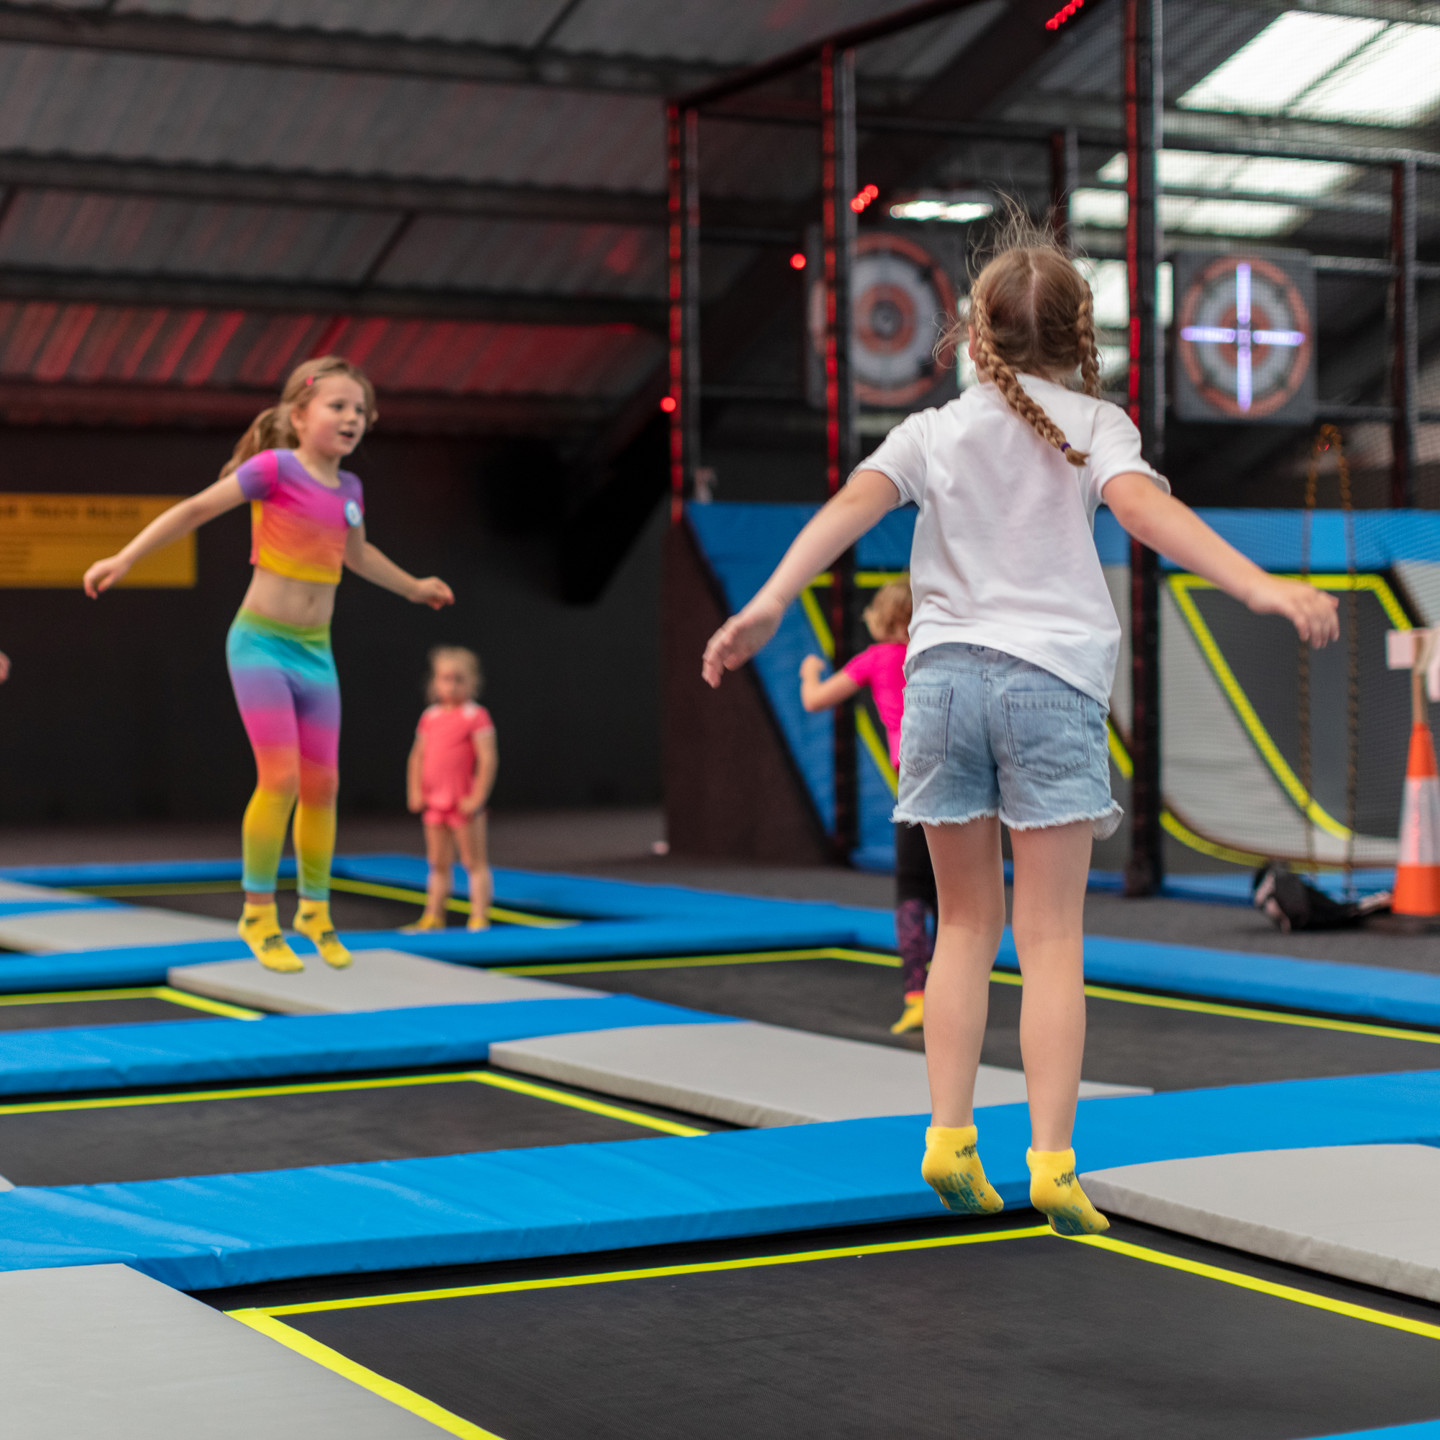 Girls bouncing on the trampolines